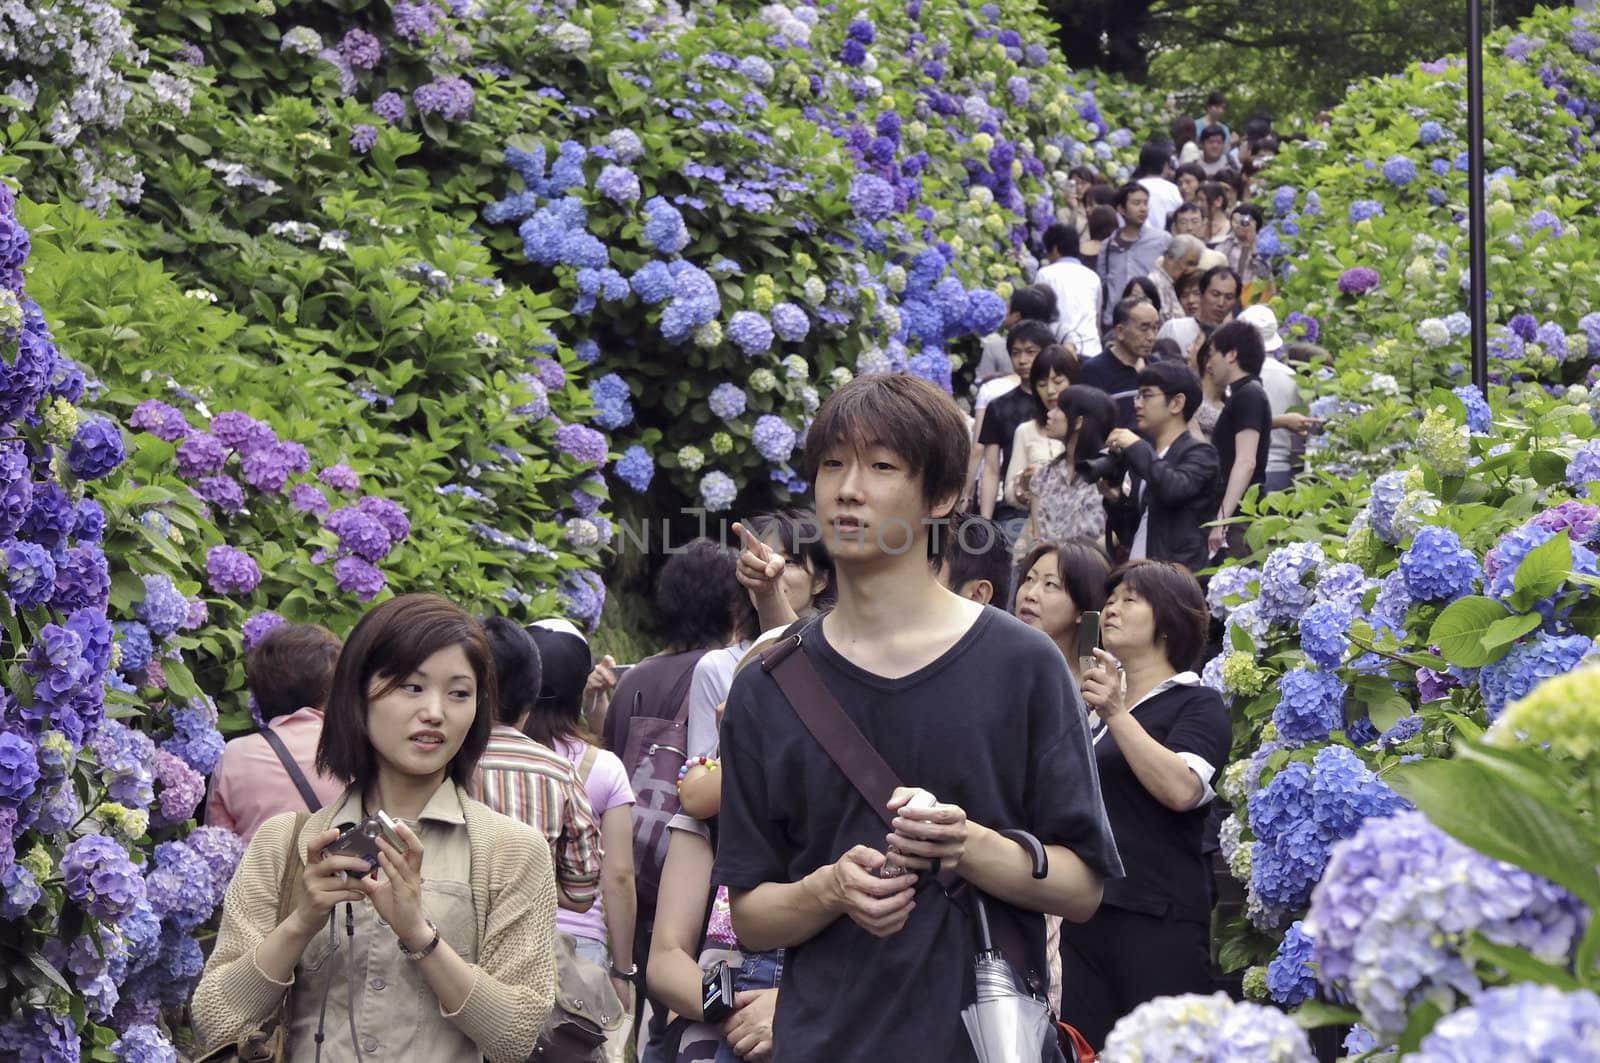 Kamakura, Japan -June 21, 2008: many people come to watch blossom Hydrangeas in Kamakura town. Traditionally this event takes place in June.